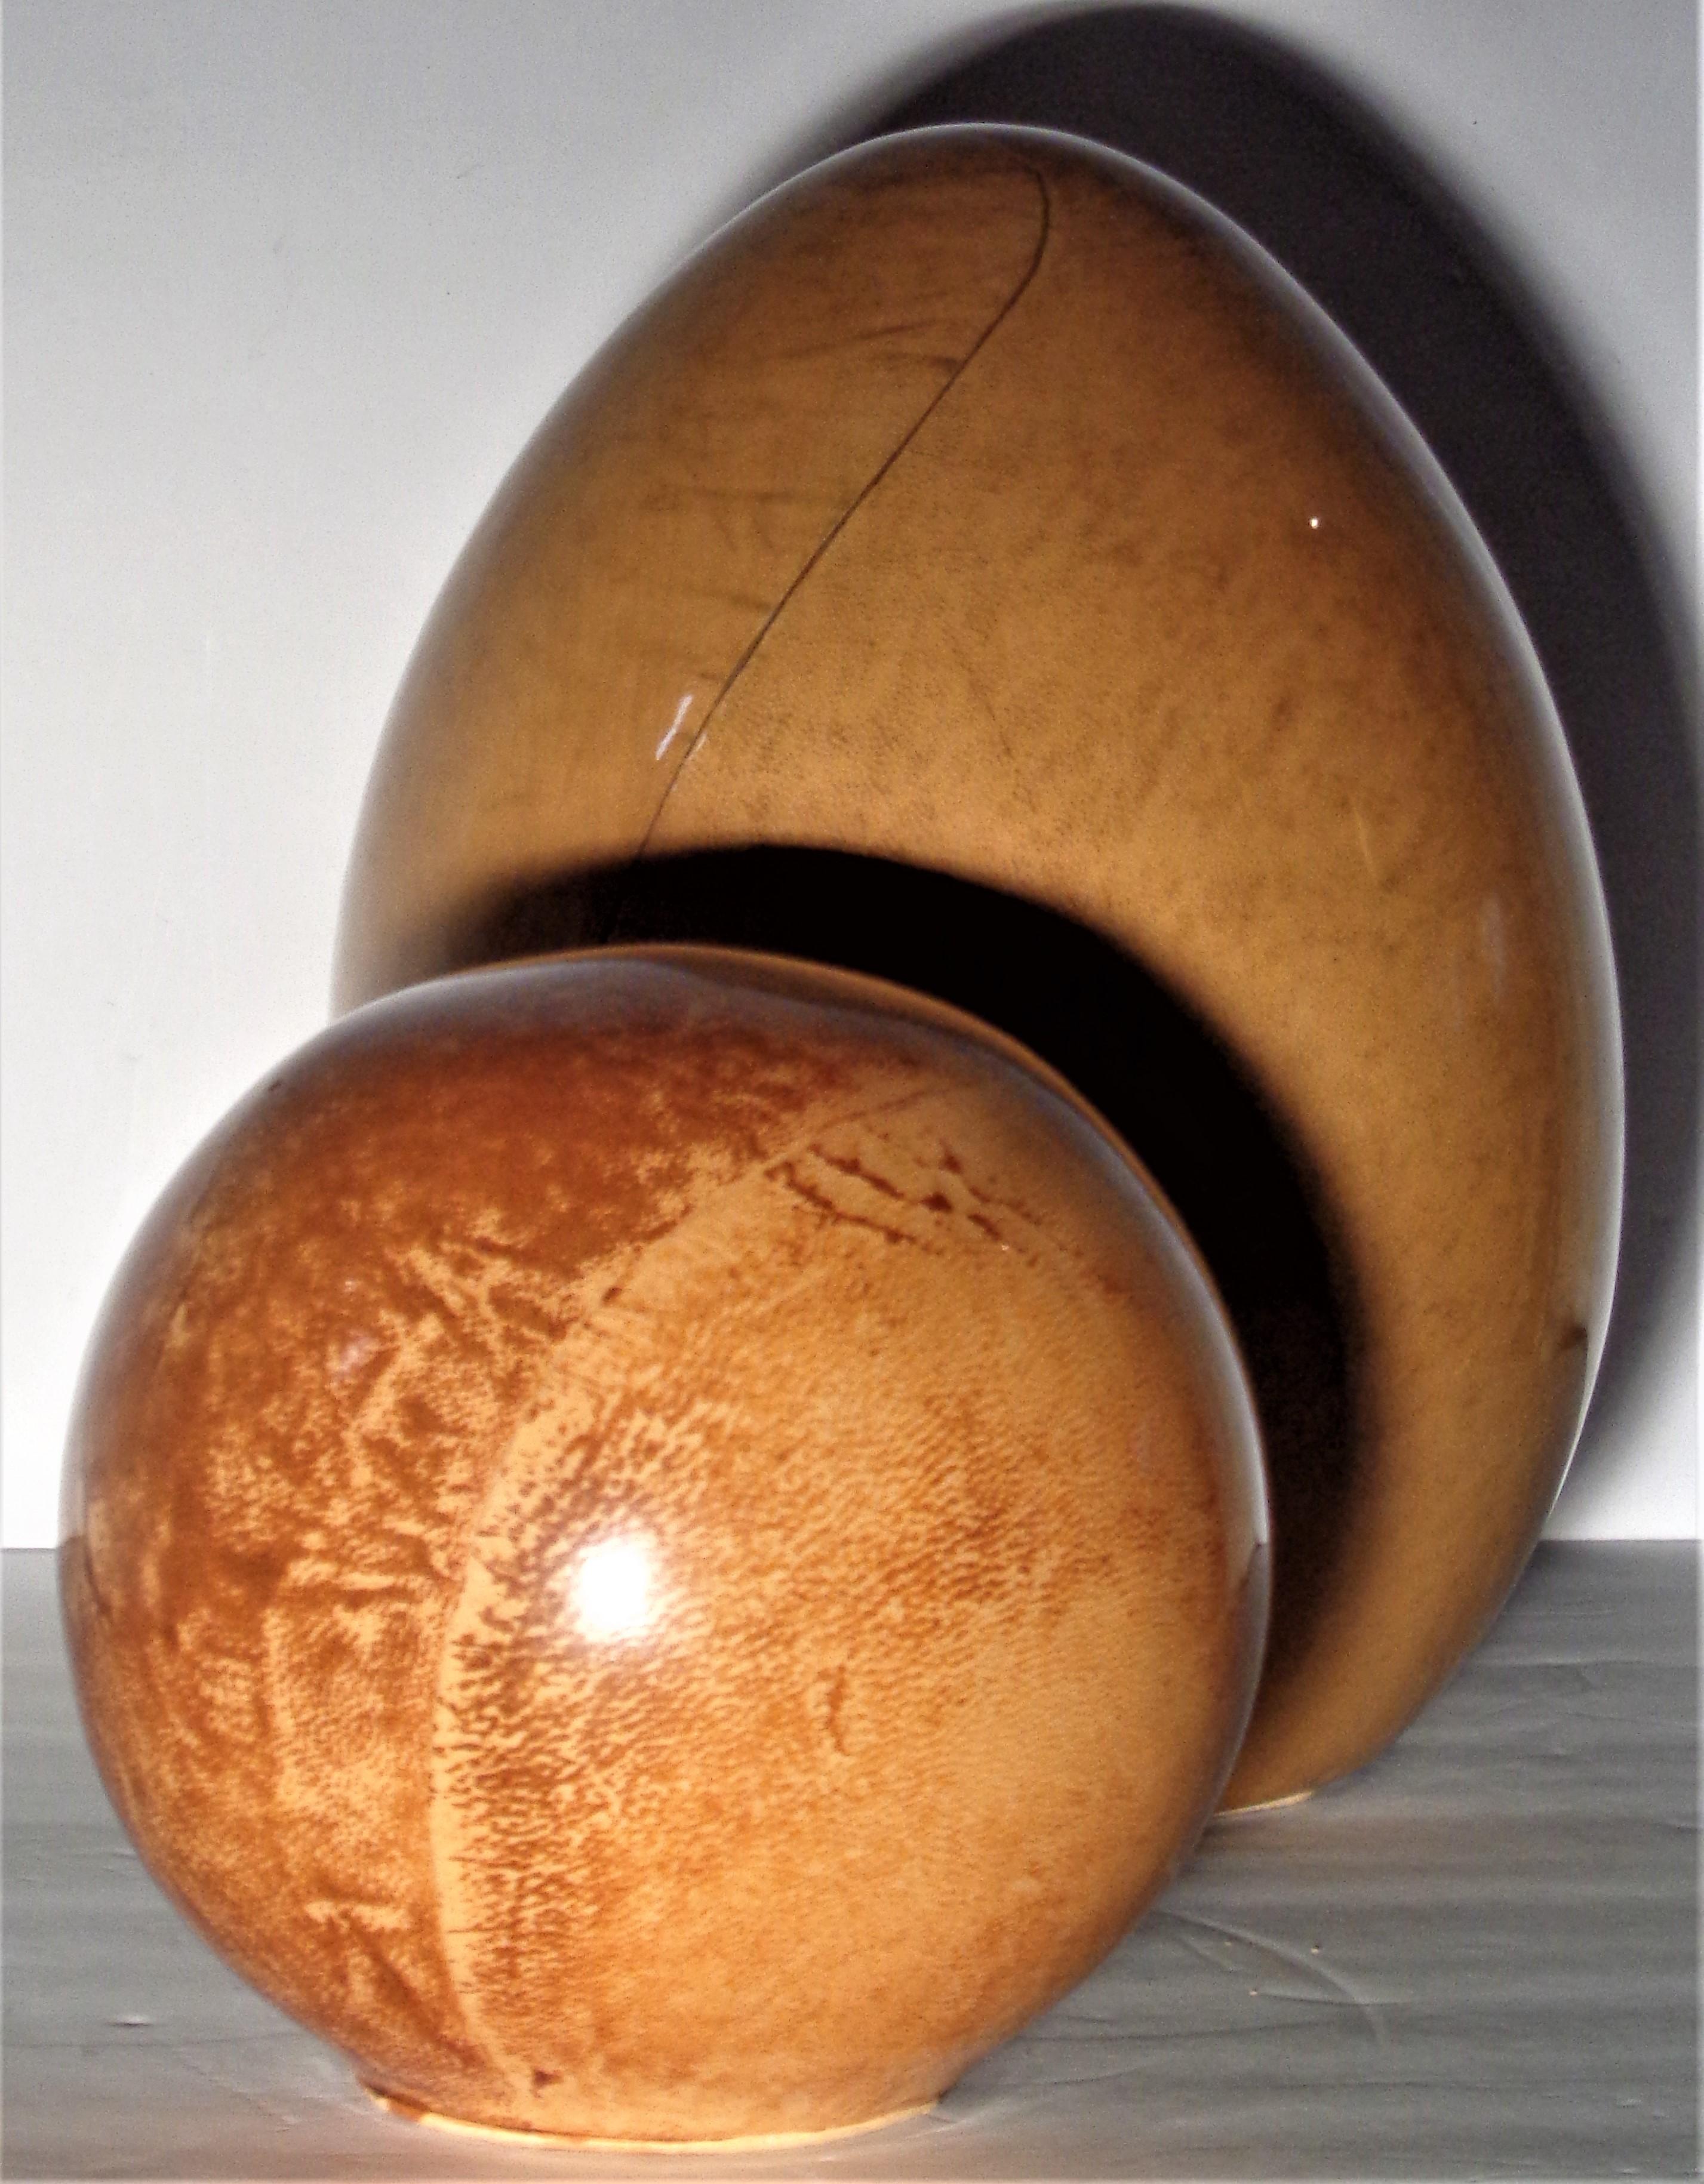 Lacquered goatskin decorative sculpture objects in the manner of Karl Springer, circa 1970's. Large egg form measures 10 inches high x 7 1/2 inches across widest point. Sphere measures 6 inches high x 6 inches across. Great all original glowing